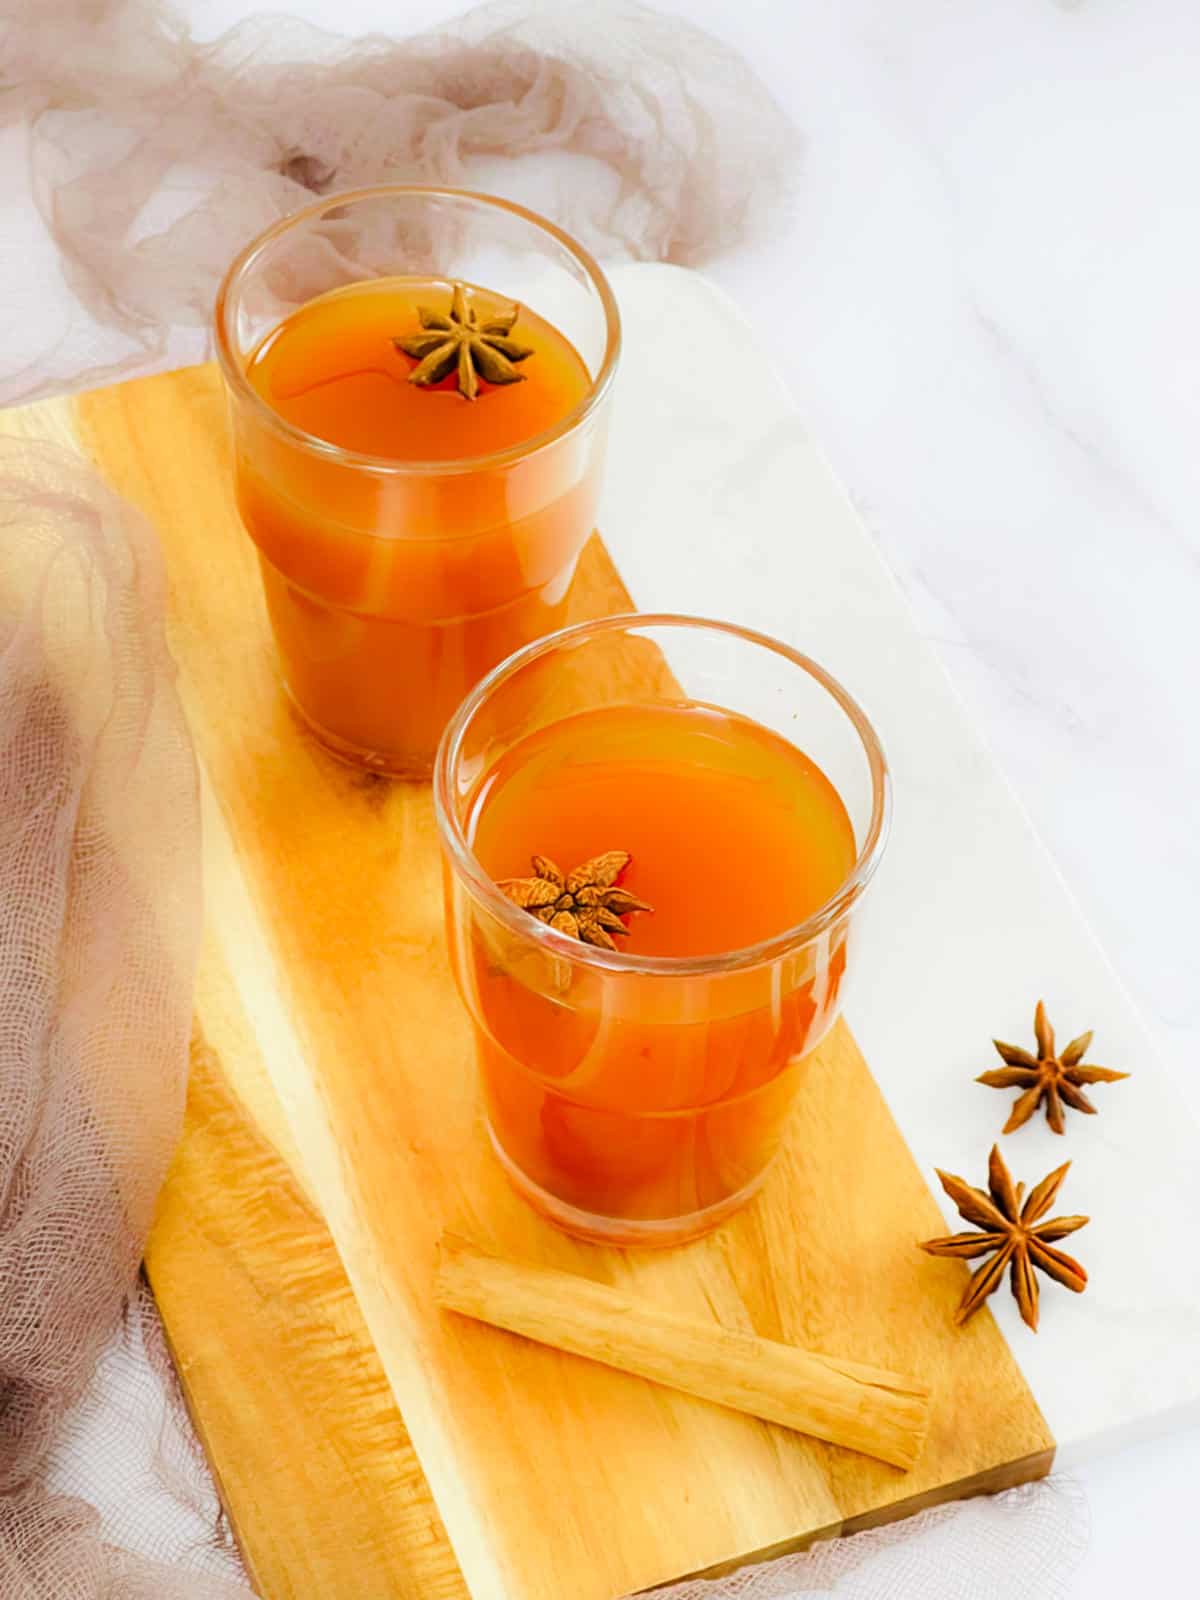 Chai hot toddy glass topped with star anise and placed on a wooden board.